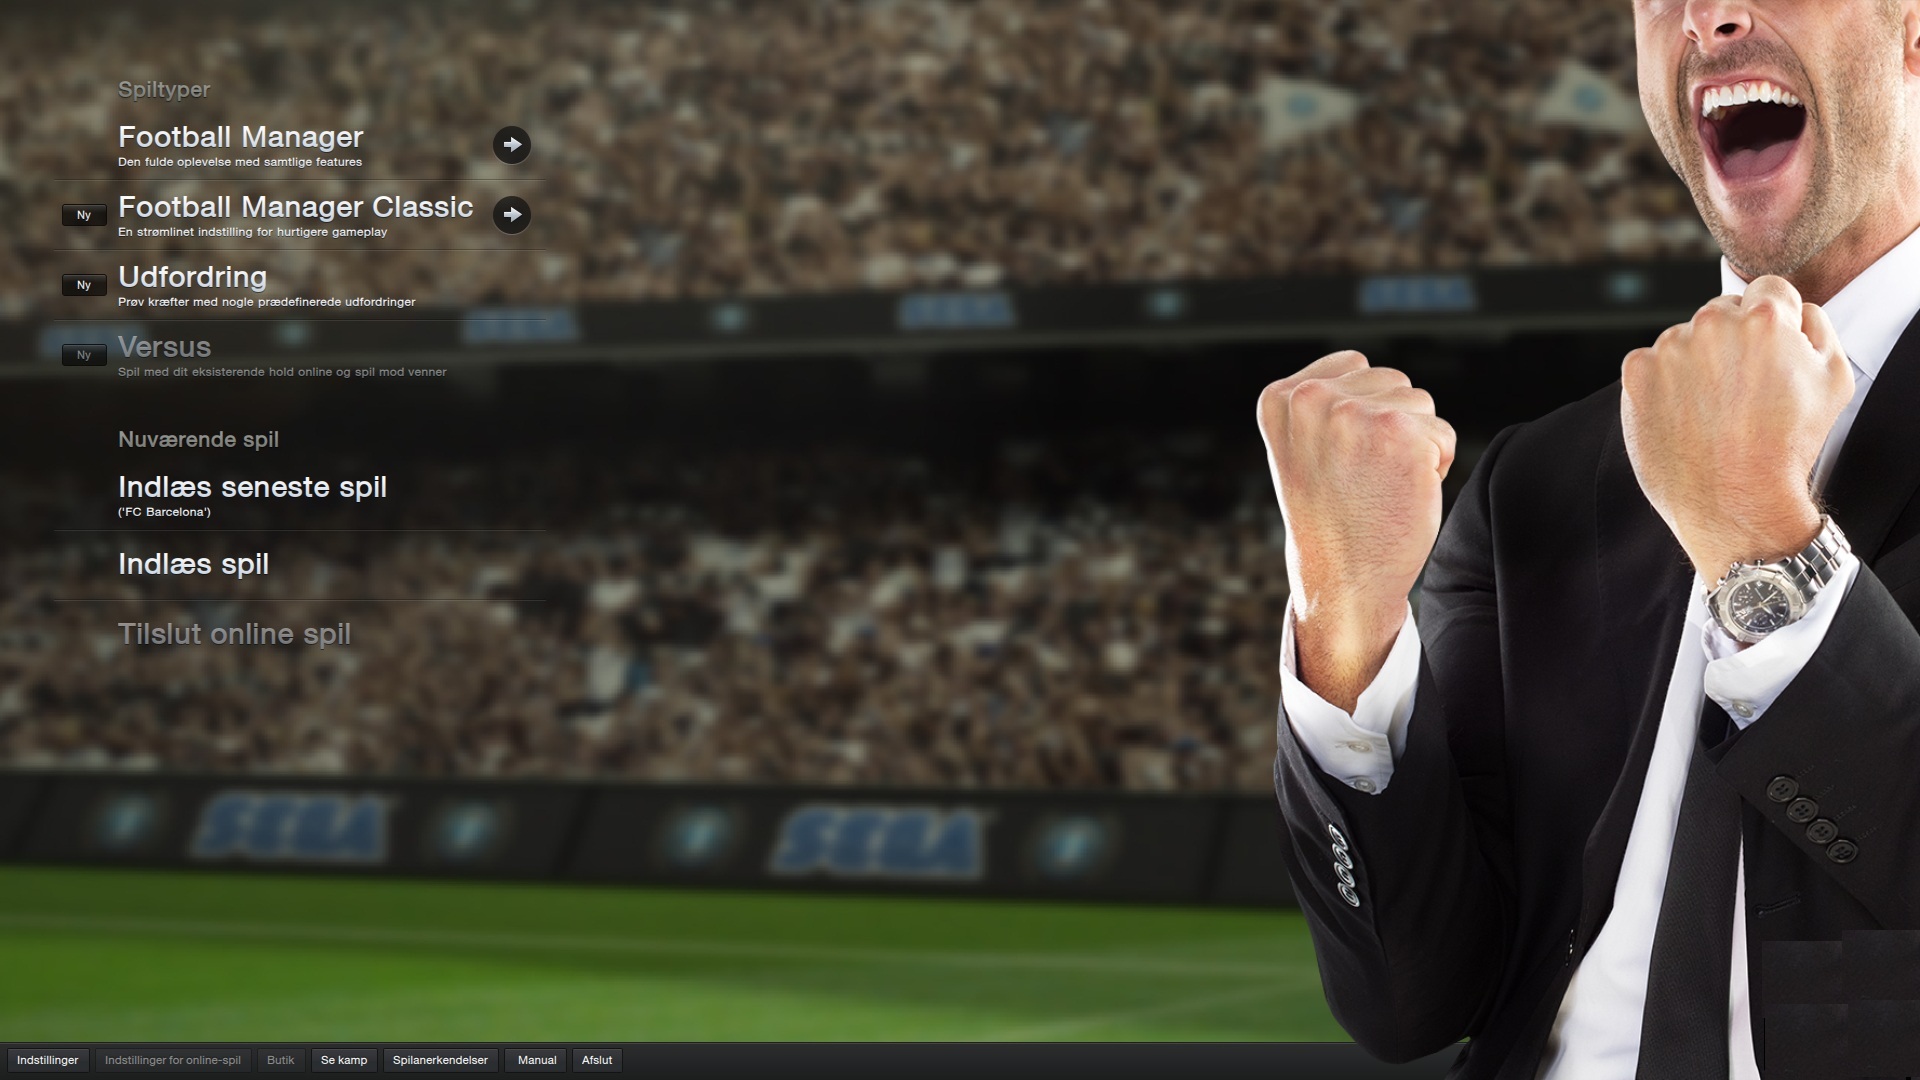 Football managers games. Футбол менеджер. Футбольный менеджер. Football Manager 2013. Футбол менеджер игра.